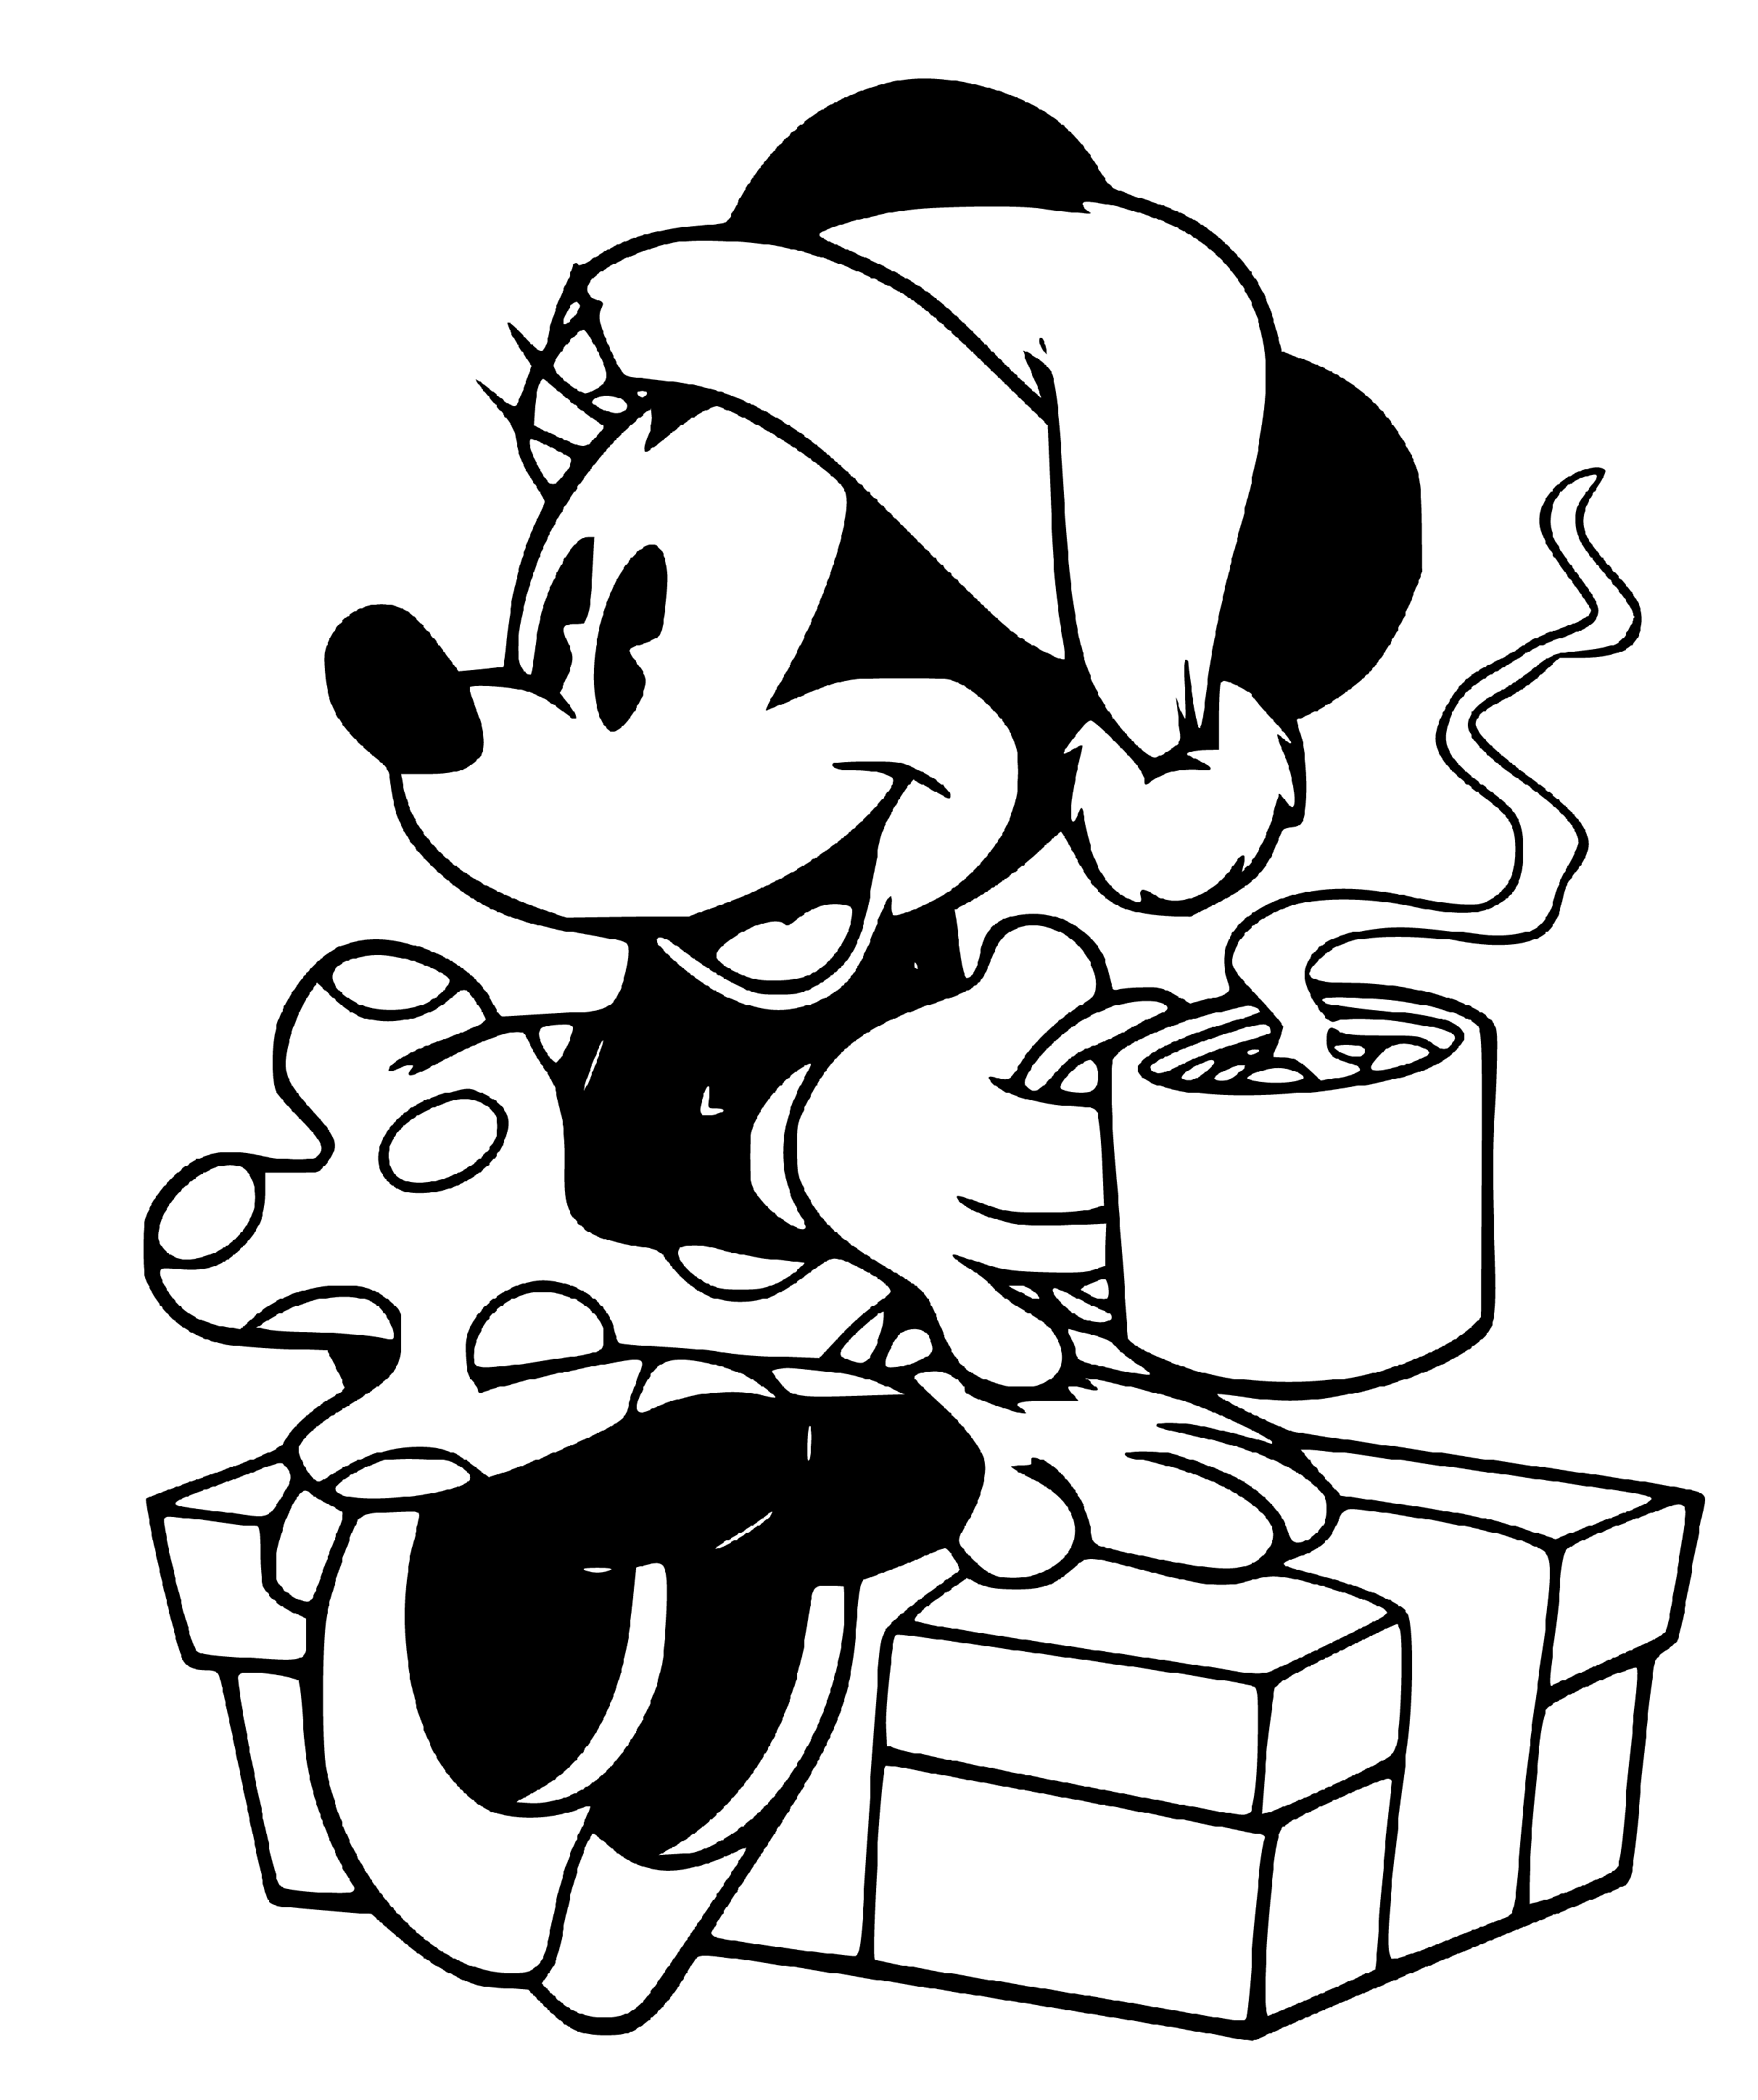 Minnie Mouse drinking cofee blank picture to color - SheetalColor.com